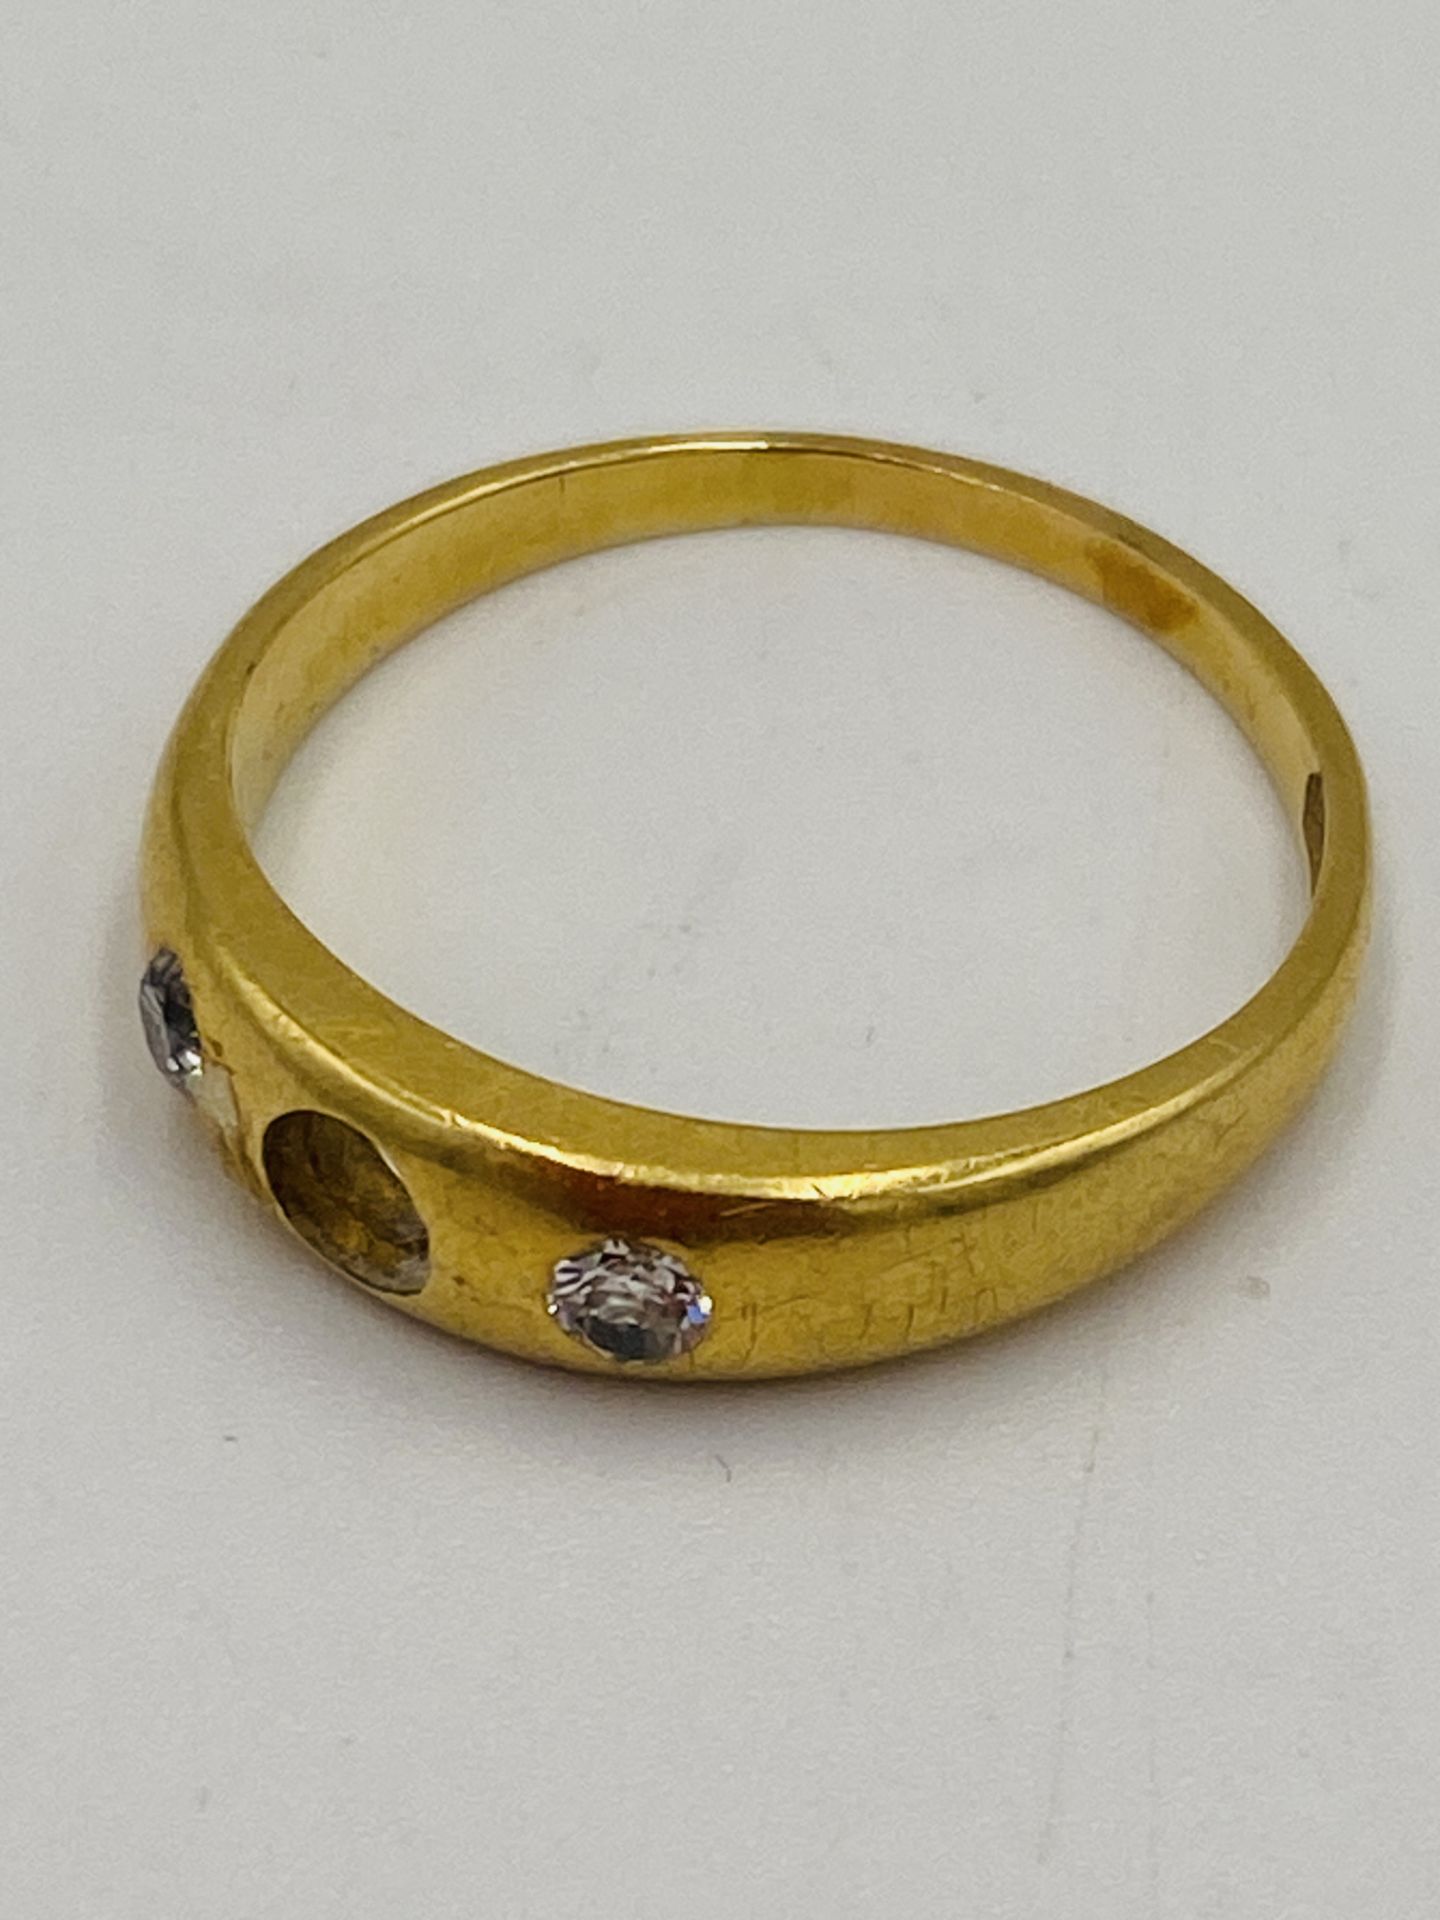 18ct gold ring - Image 5 of 6